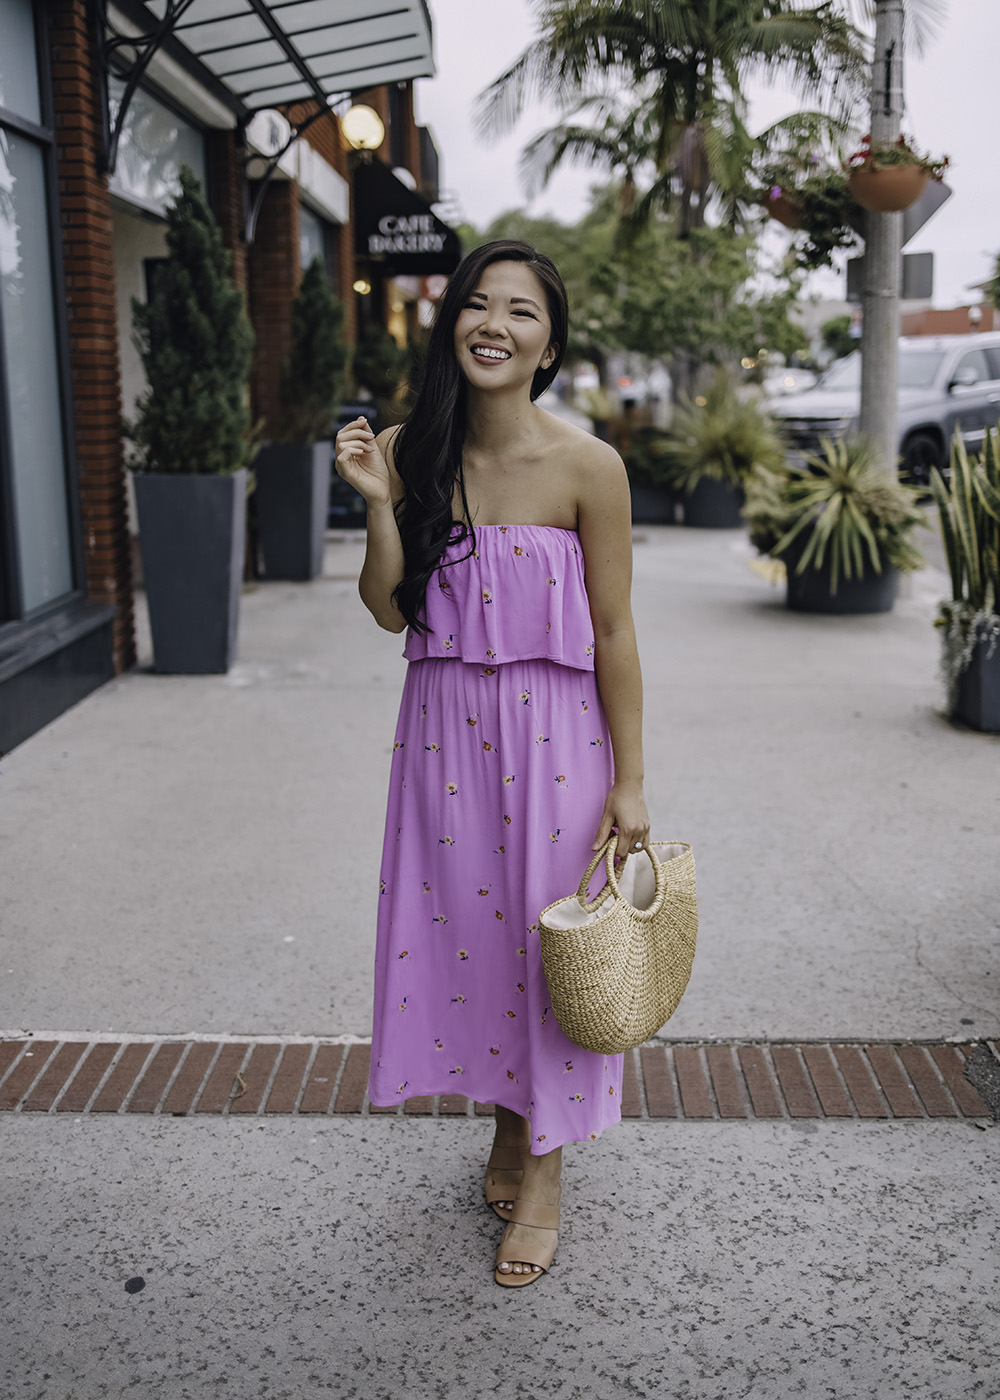 Summer Outfit: Pink Strapless Floral Dress